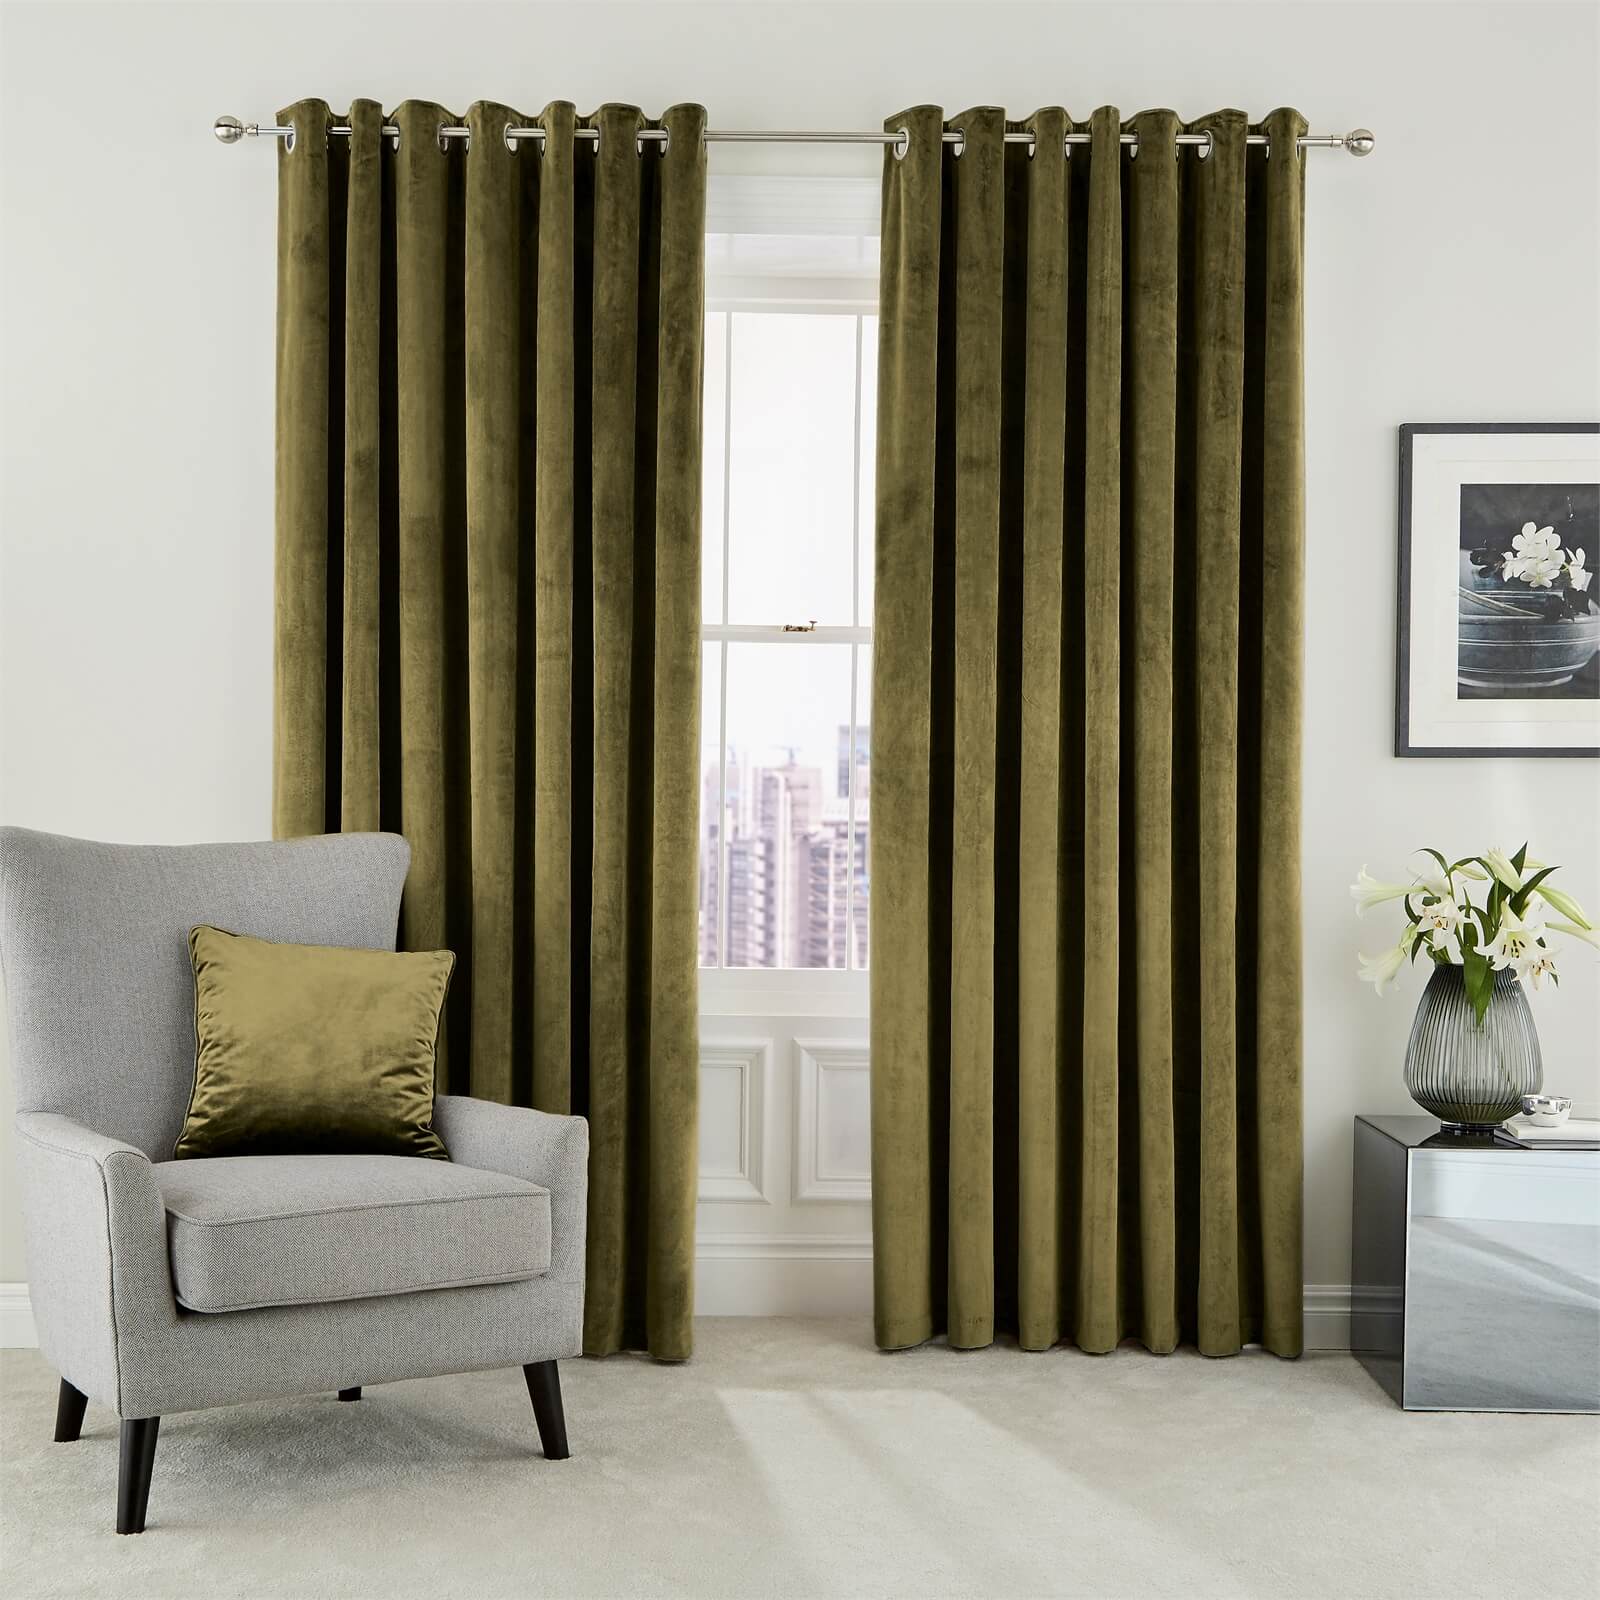 Peacock Blue Hotel Collection Escala Lined Curtains 90 x 90 - Olive